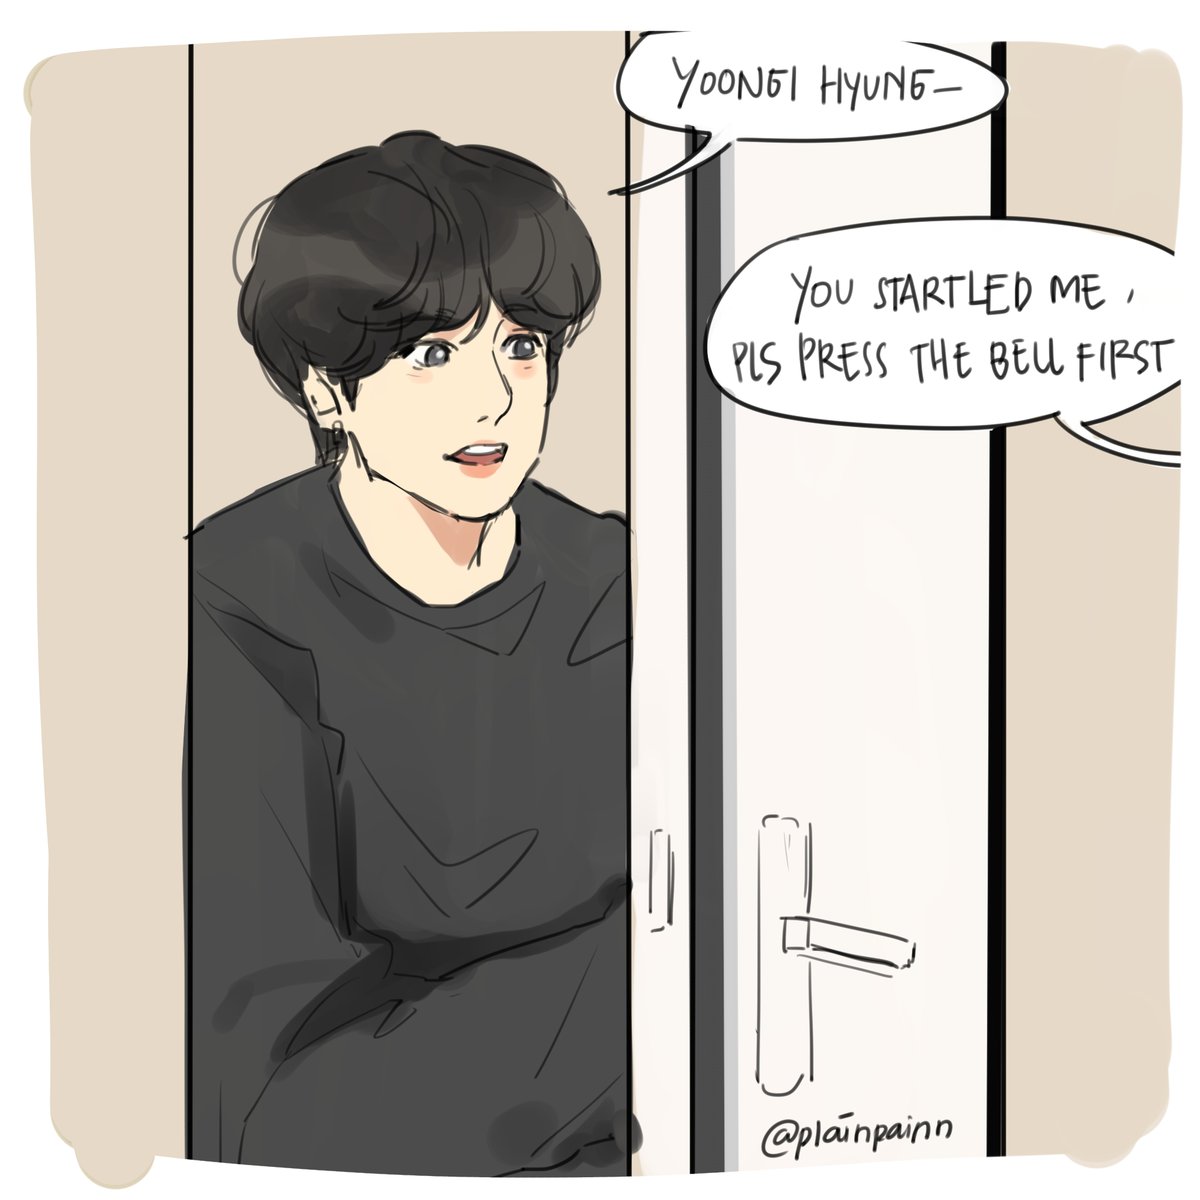 some doodles abt how yoongi came up with the rules before entering genius lab (ft. maknae line) 